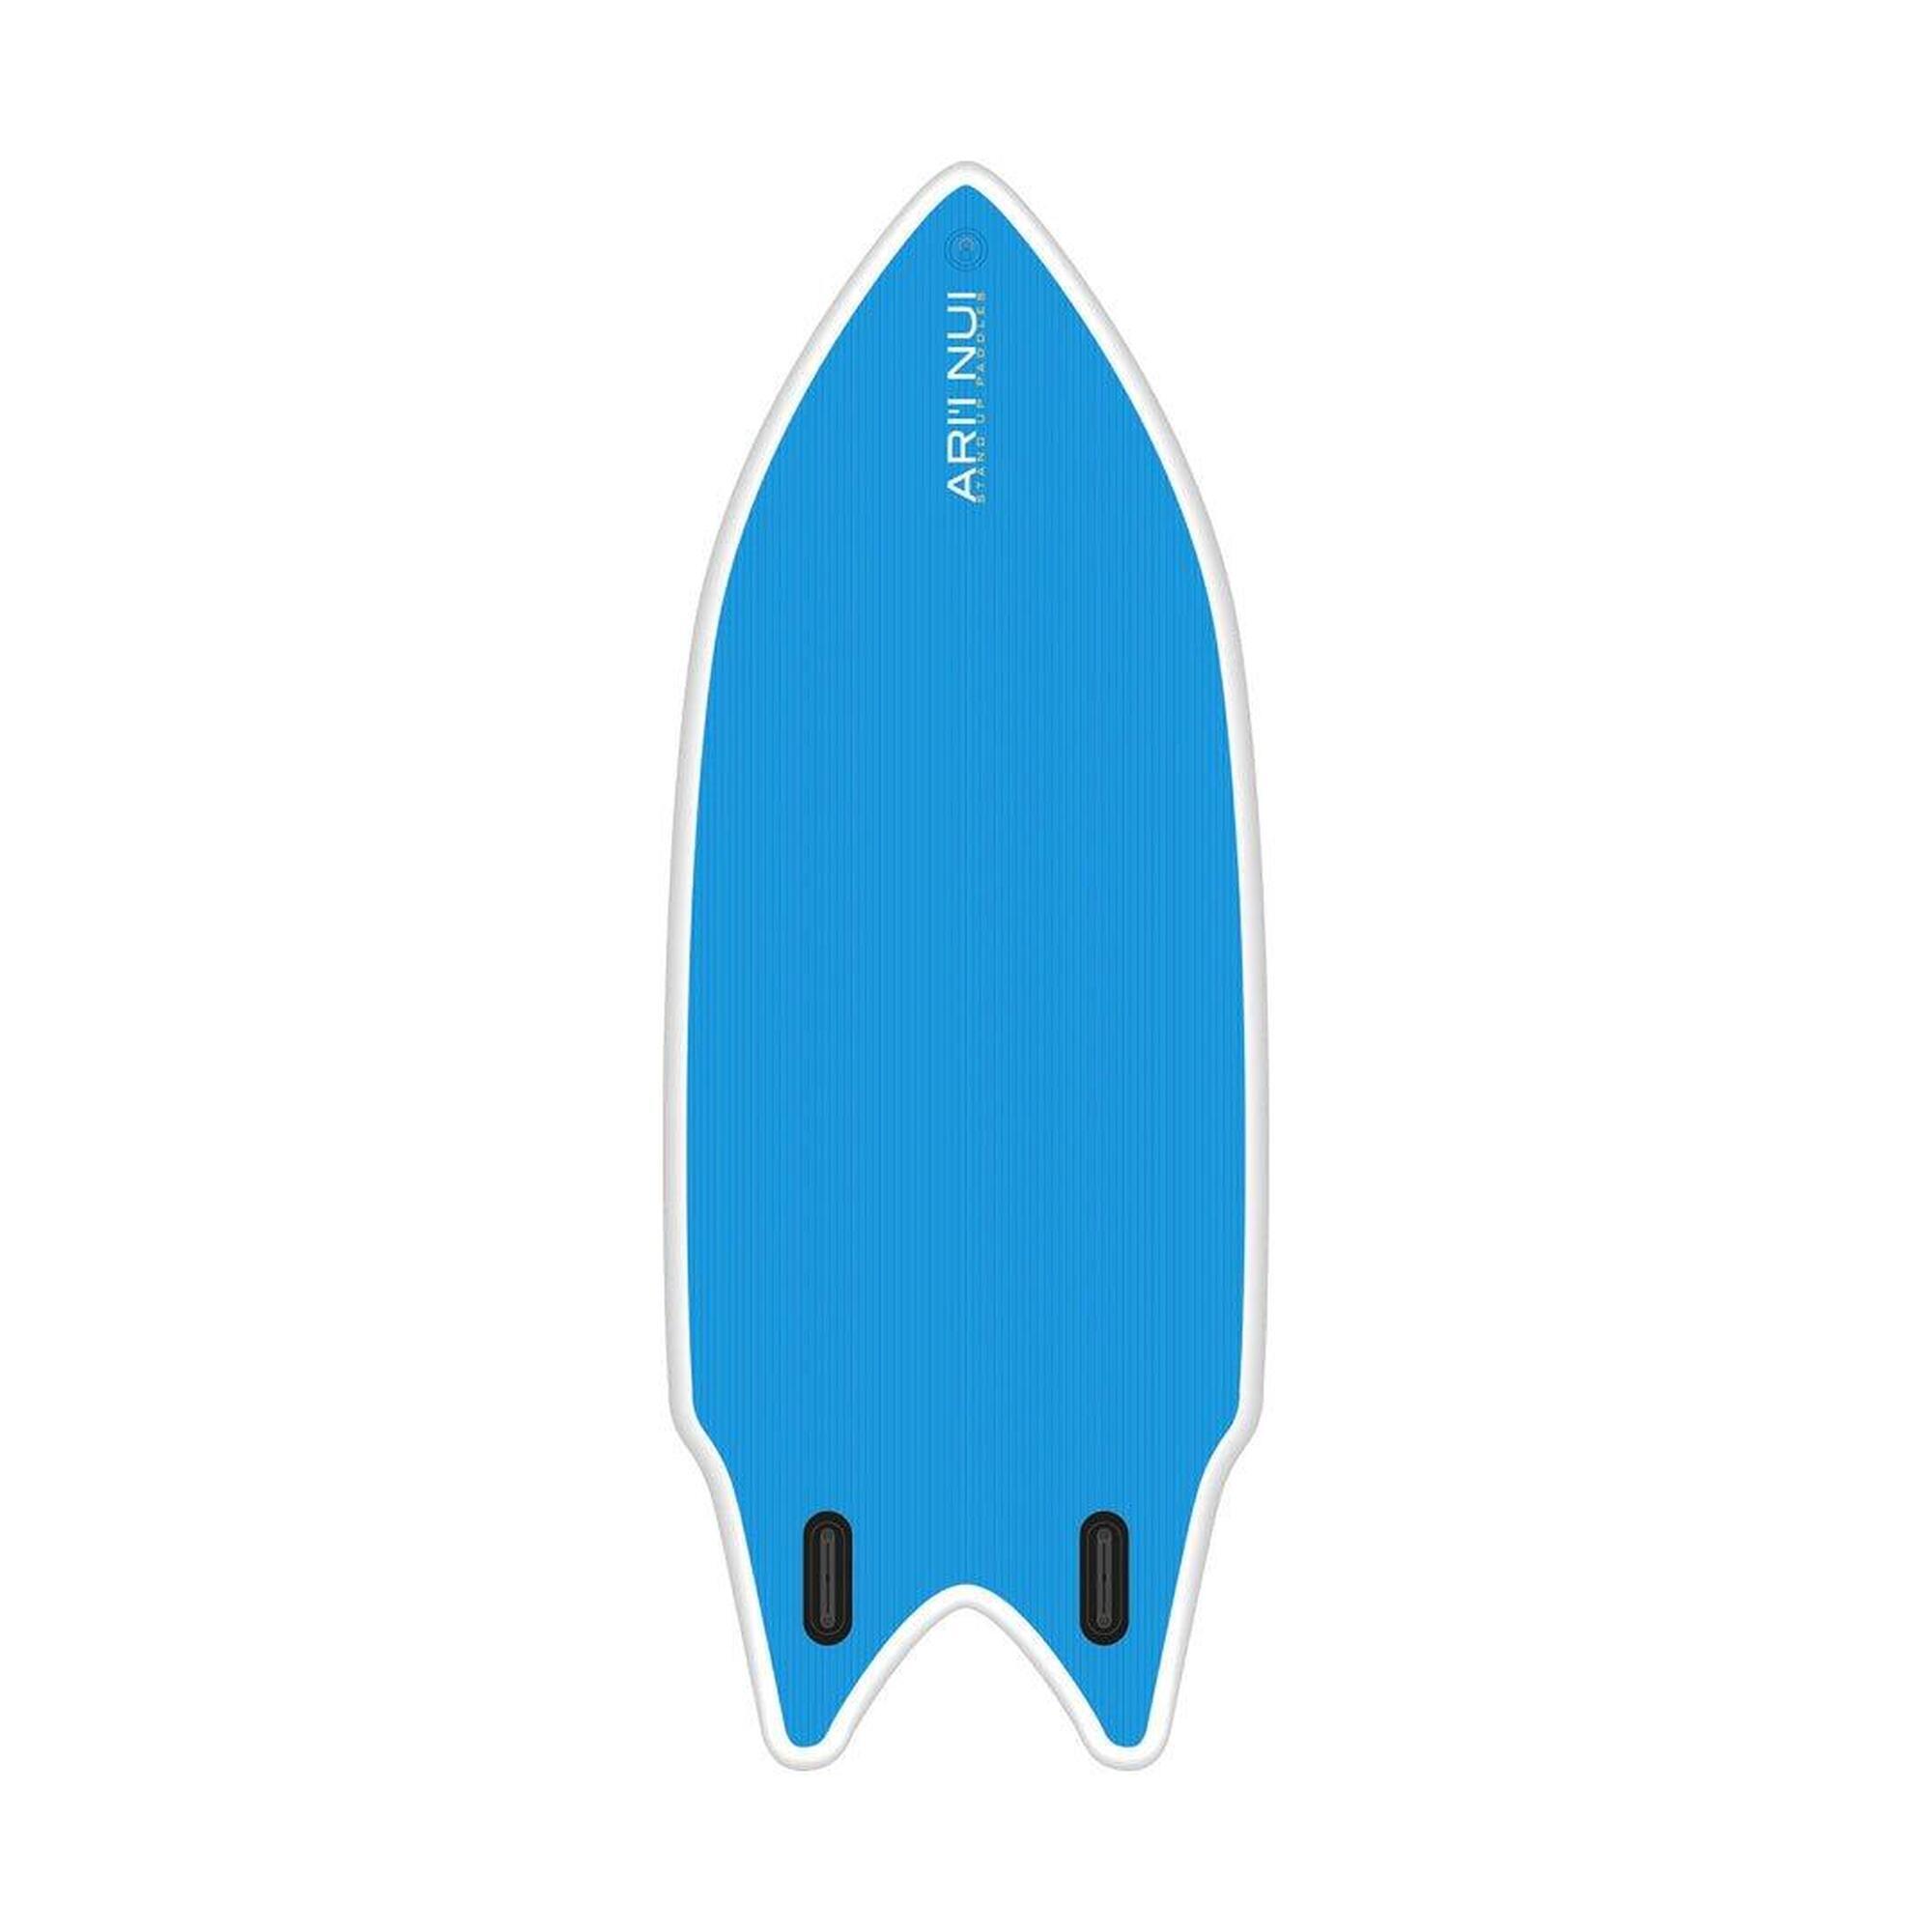 Planche de stand up paddle gonflable Giant Blow Xxl 16'8